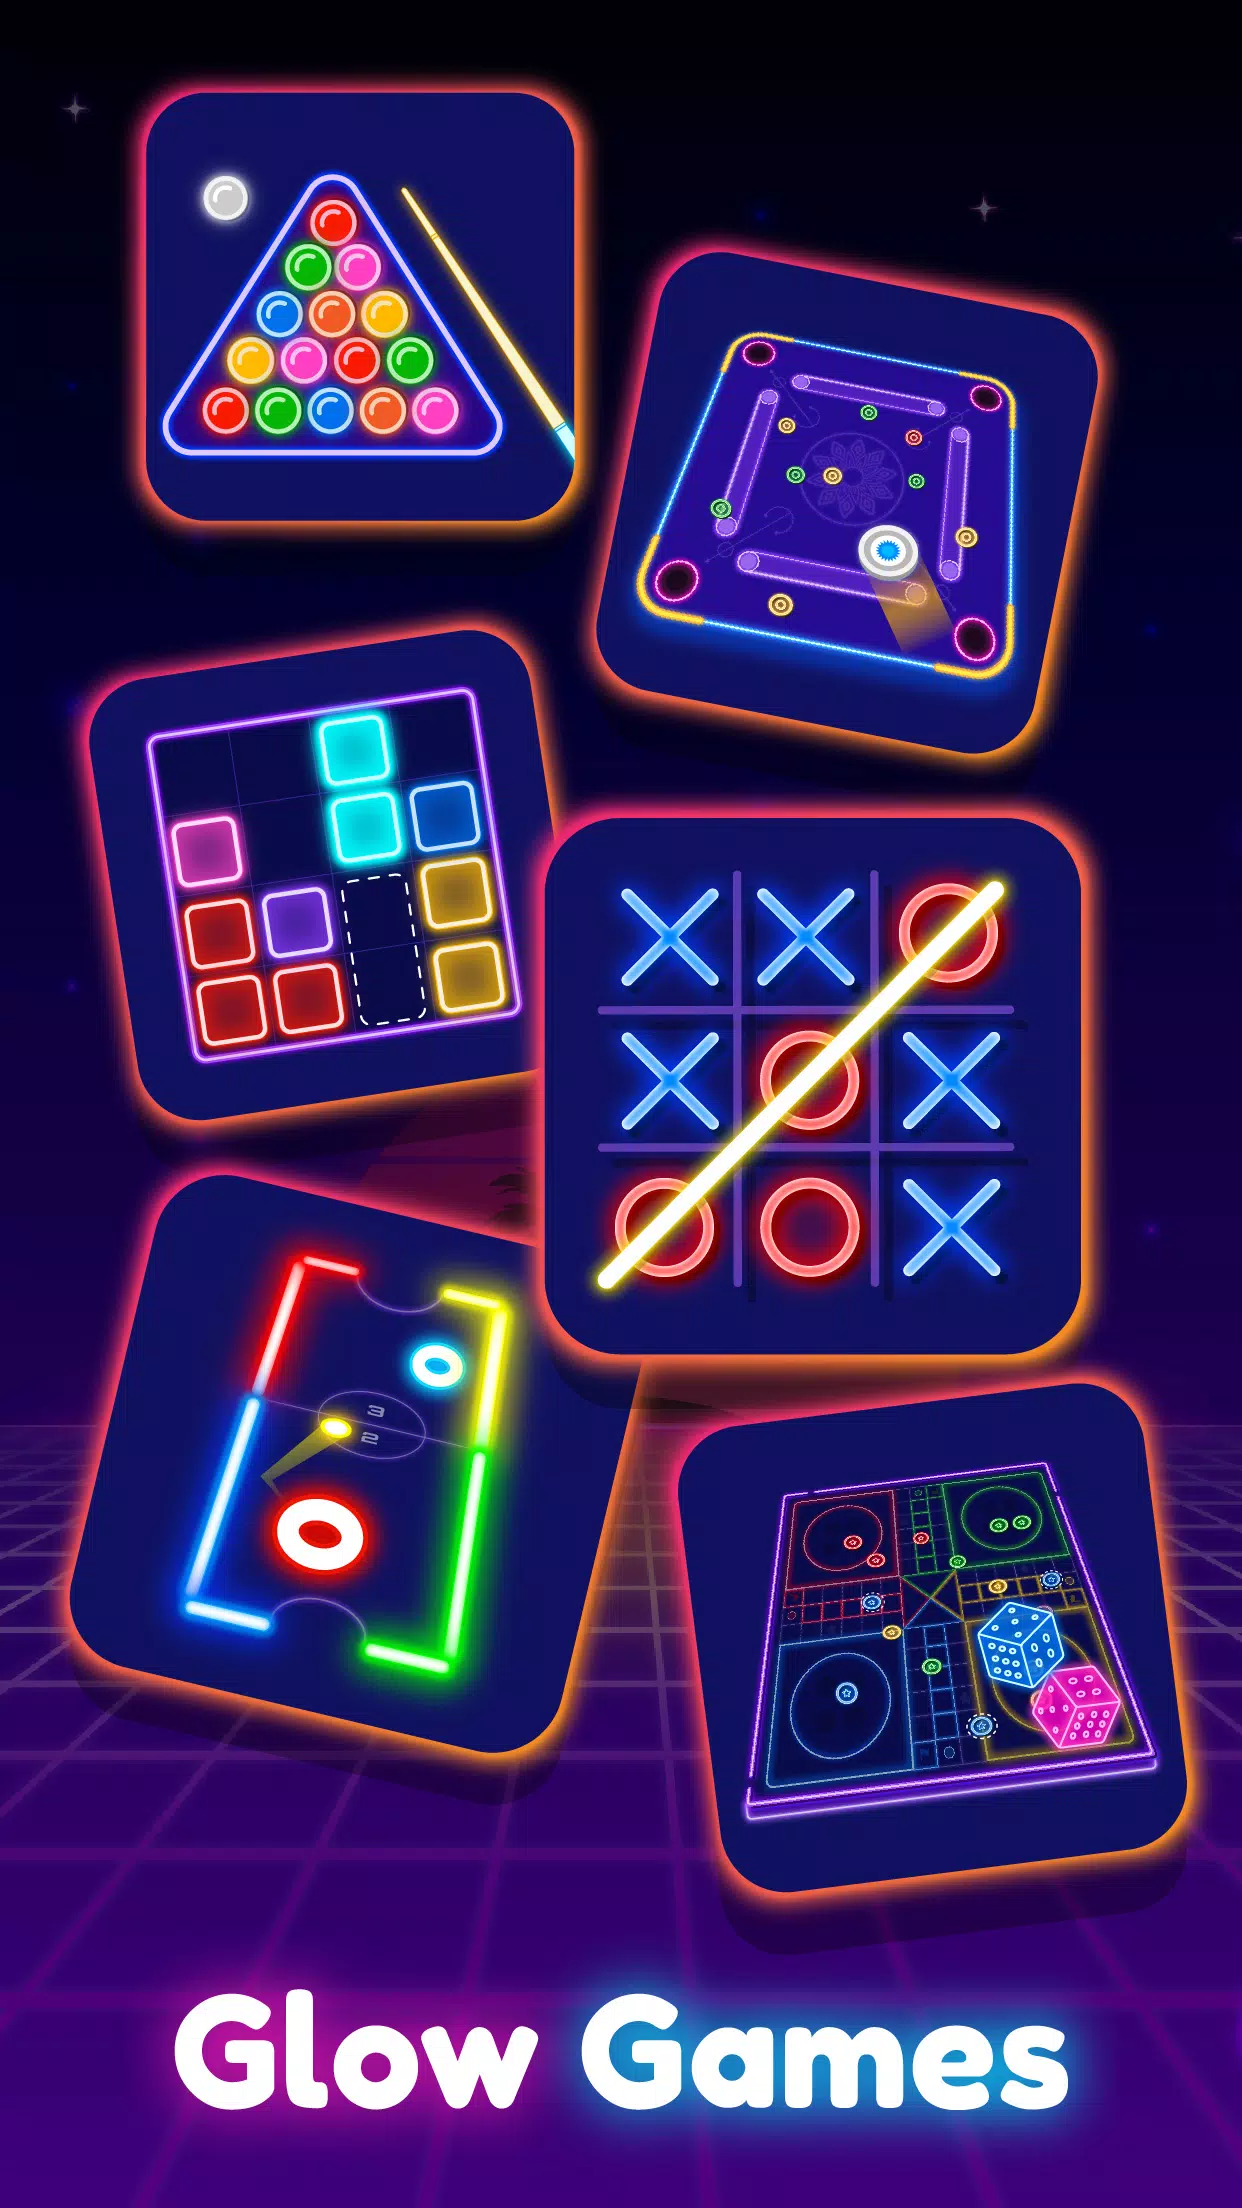 Tic Tac Toe Glow 2 APK for Android - Download